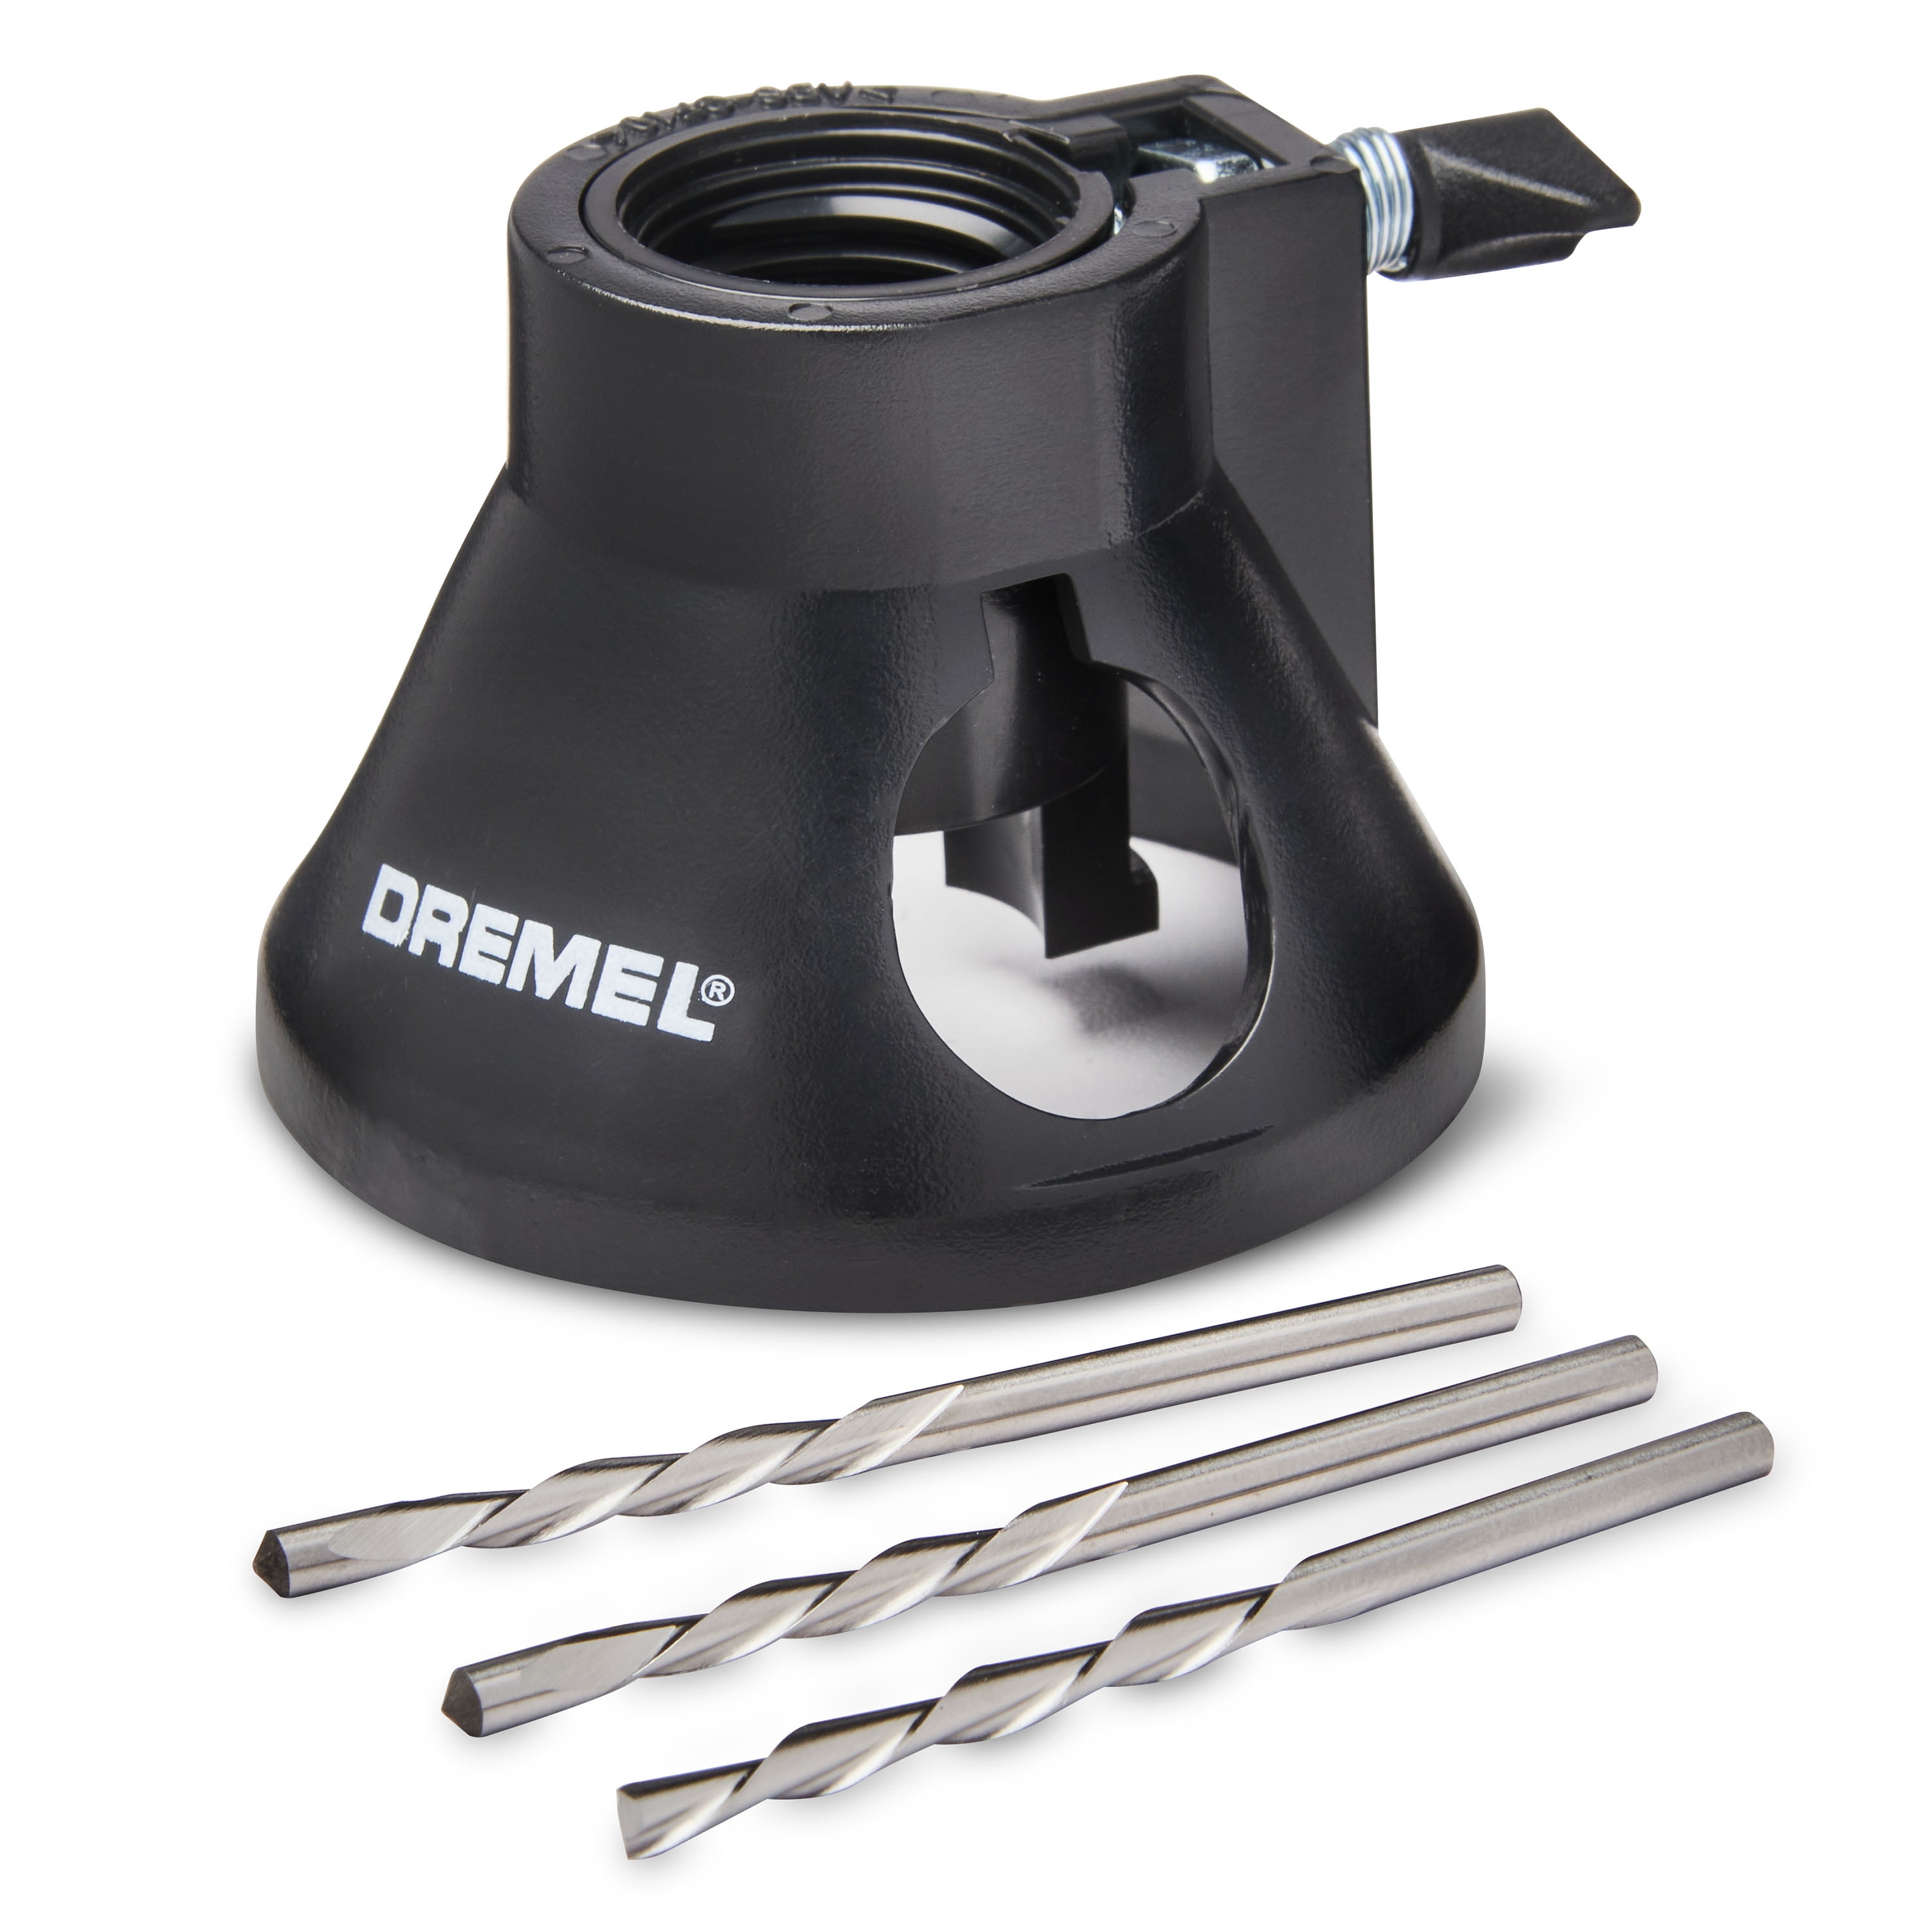 Dremel 565 Multipurpose Cutting Kit with Rotary Tool Screw-On Mounting System